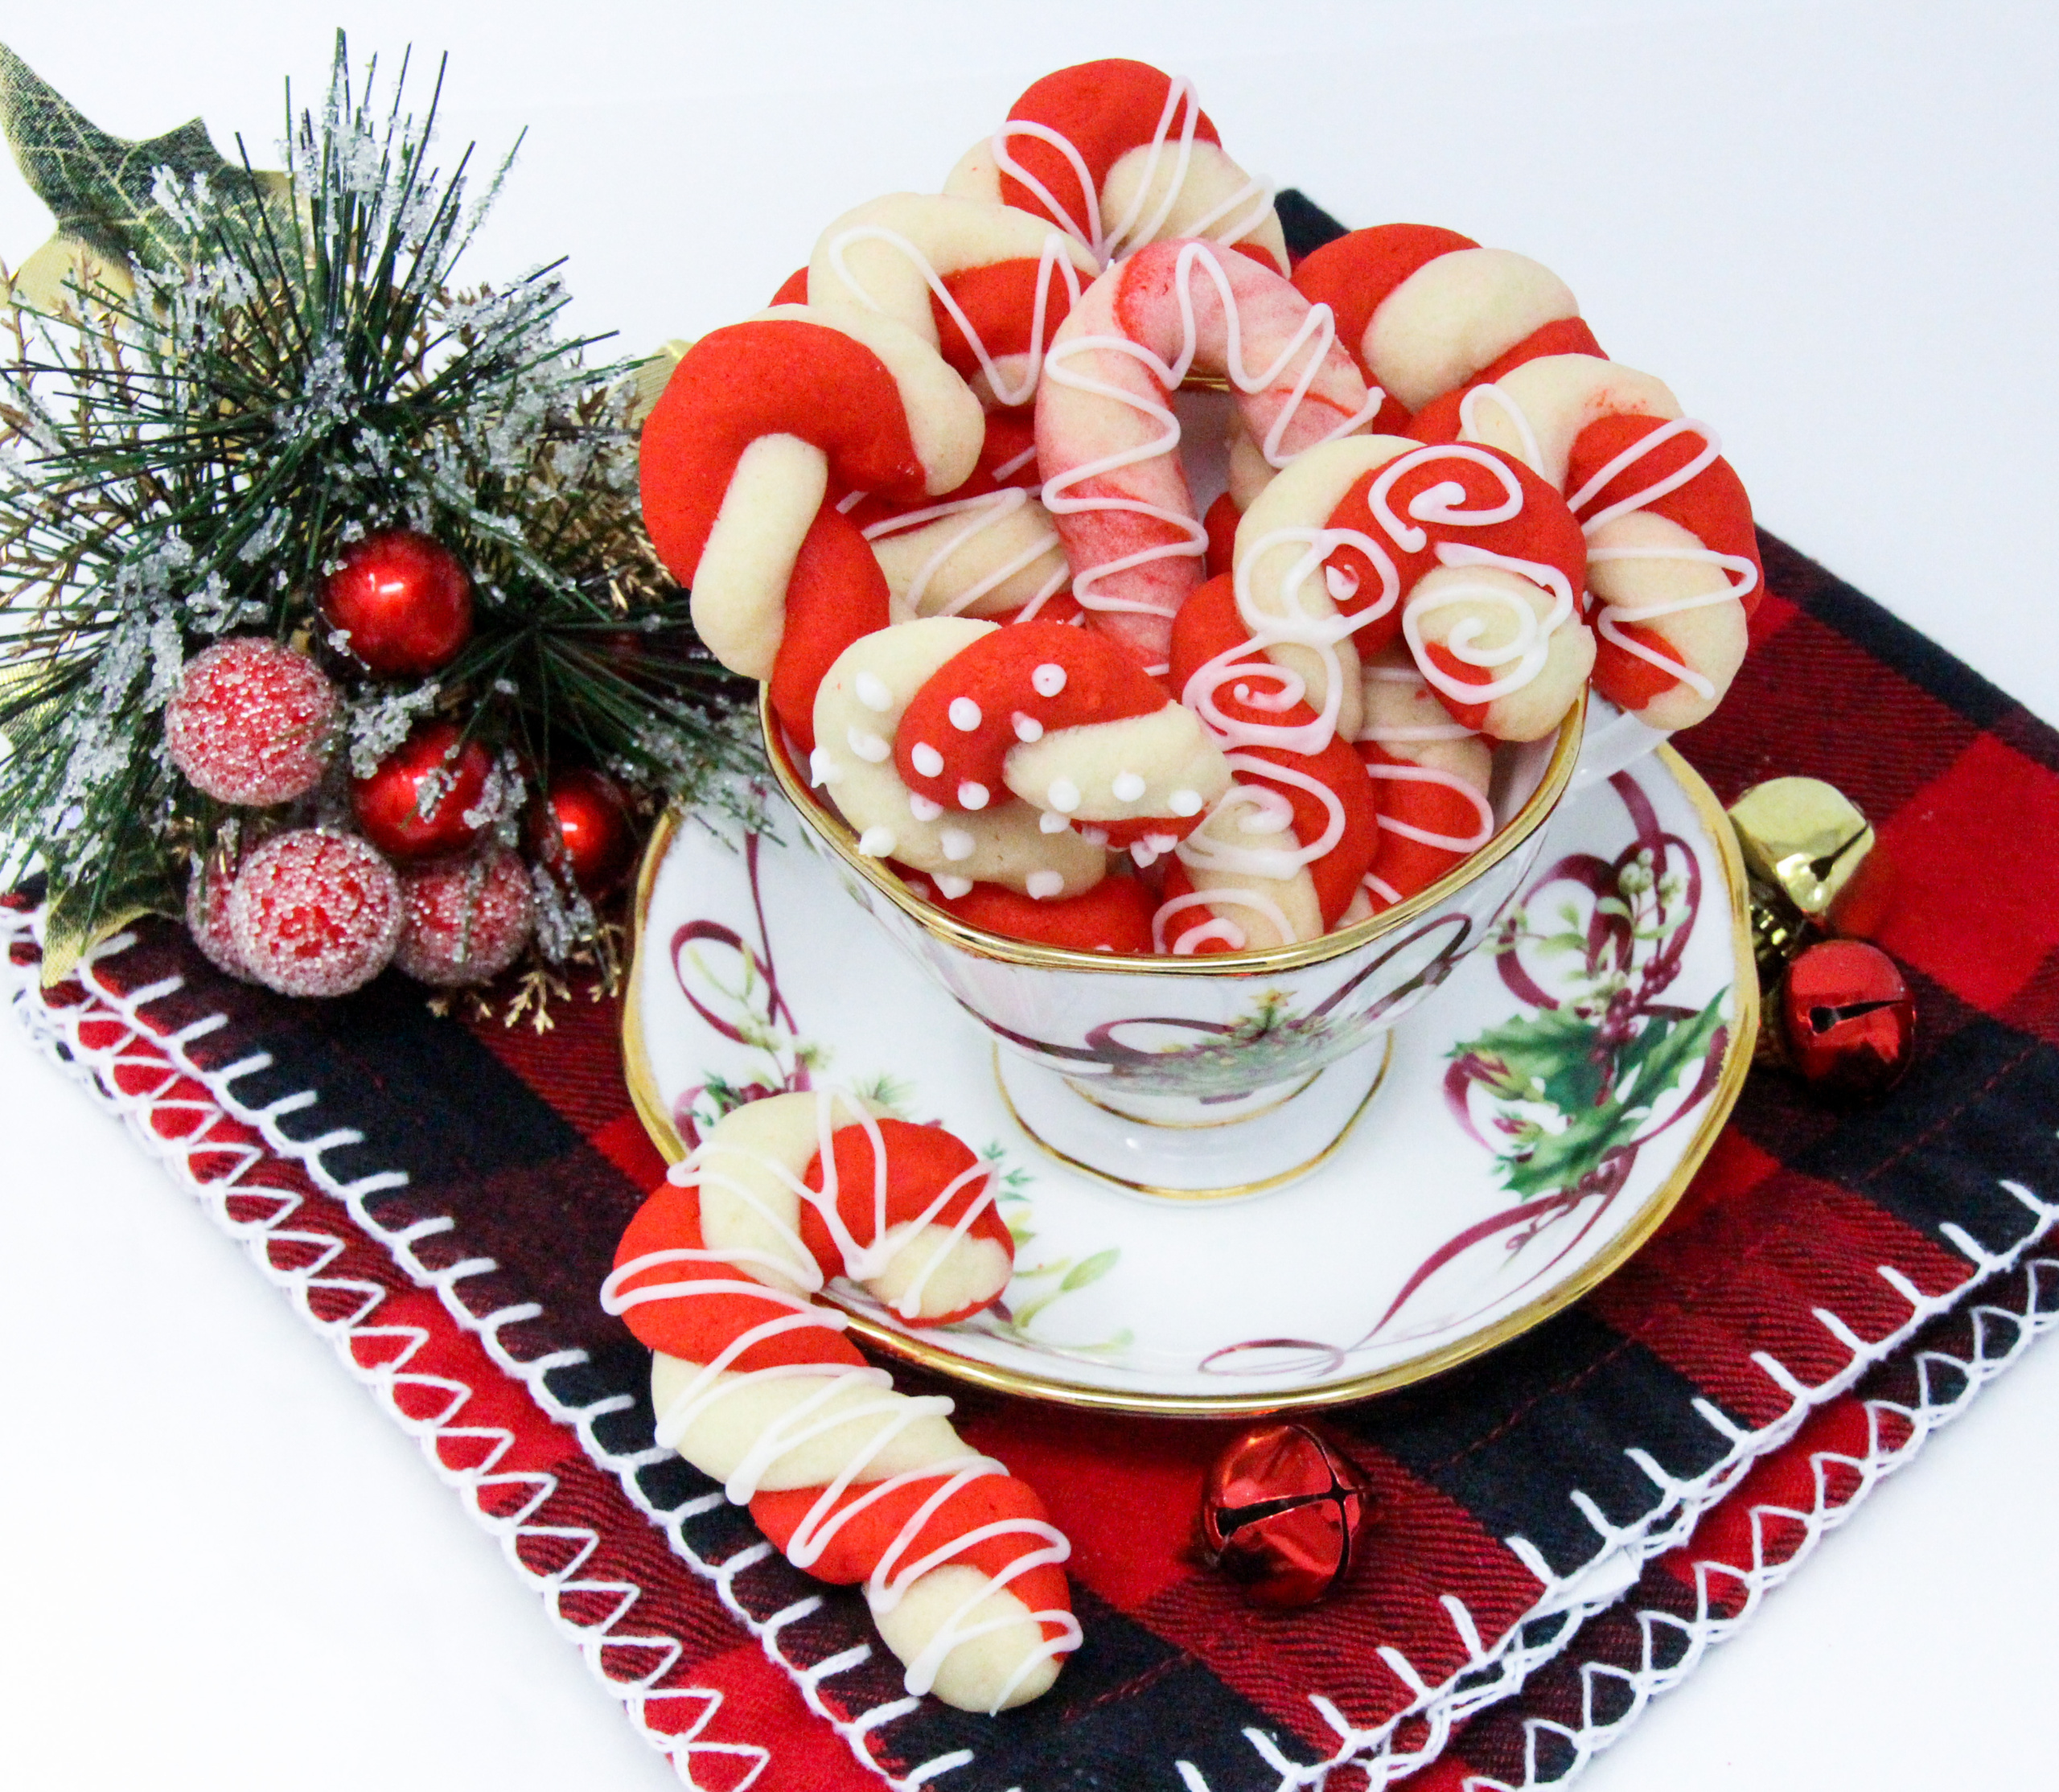 The colorful twists of the peppermint, and red Candy Cane cookies will add a delicious and jolly look to your holiday cookie platter! Recipe shared with permission granted by Leslie Budewitz, author of PEPPERMINT BARKED. 